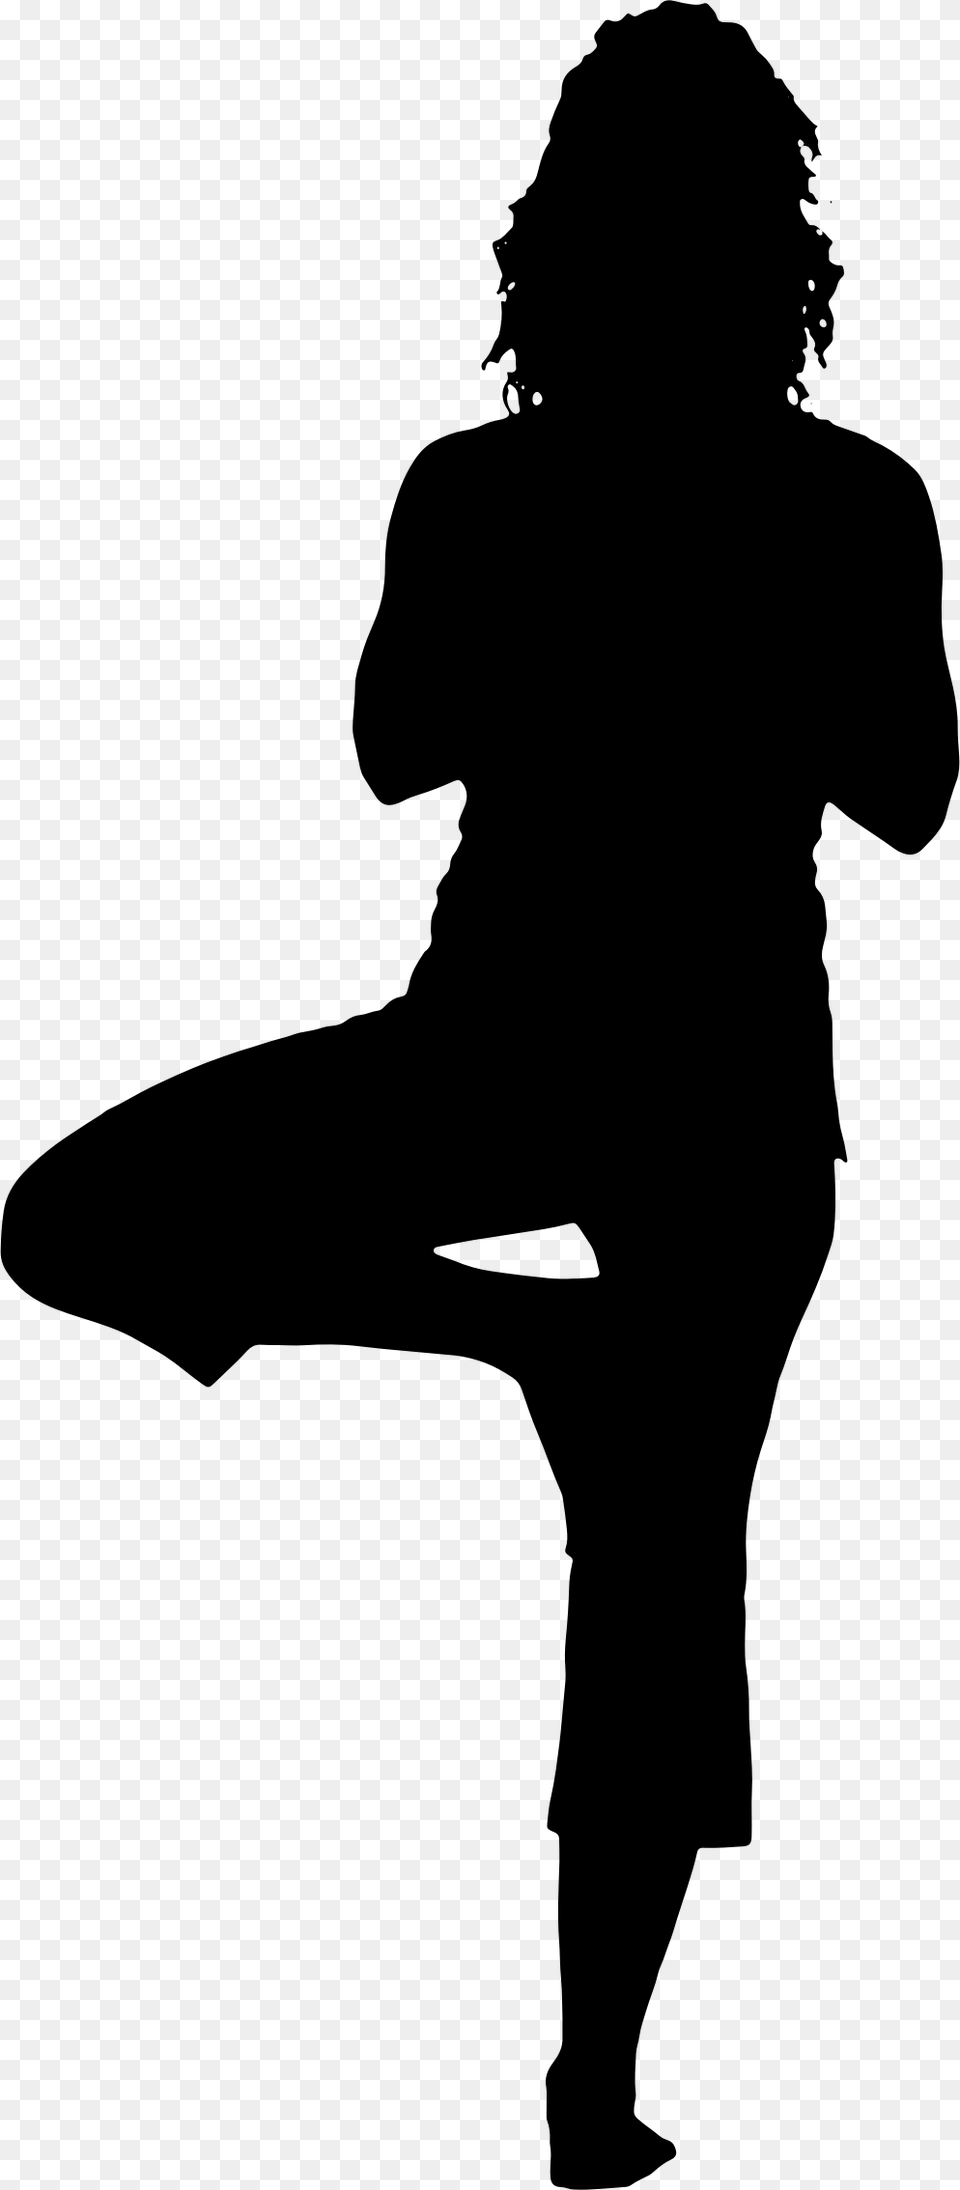 Woman Yoga Pose Silhouette Silhouette Of Tree Pose, Gray Free Transparent Png